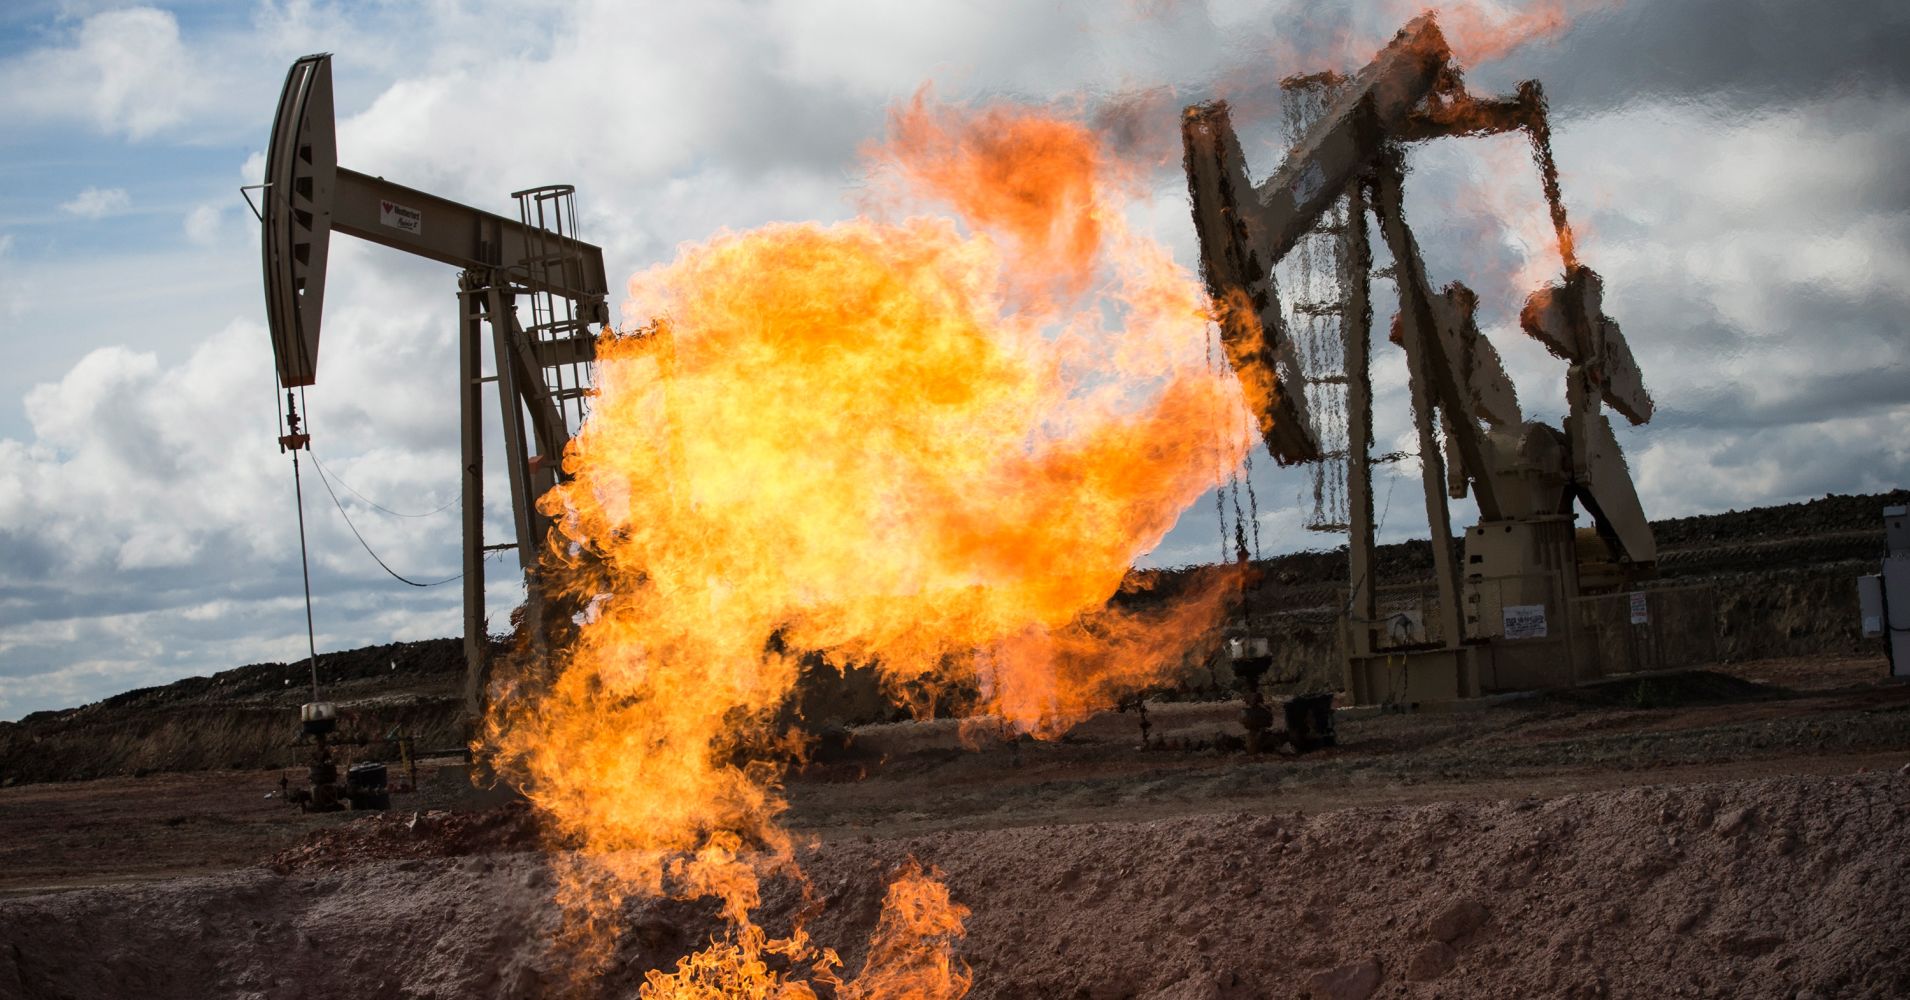 A gas flare is seen at an oil well site on July 26, 2013 outside Williston, North Dakota.